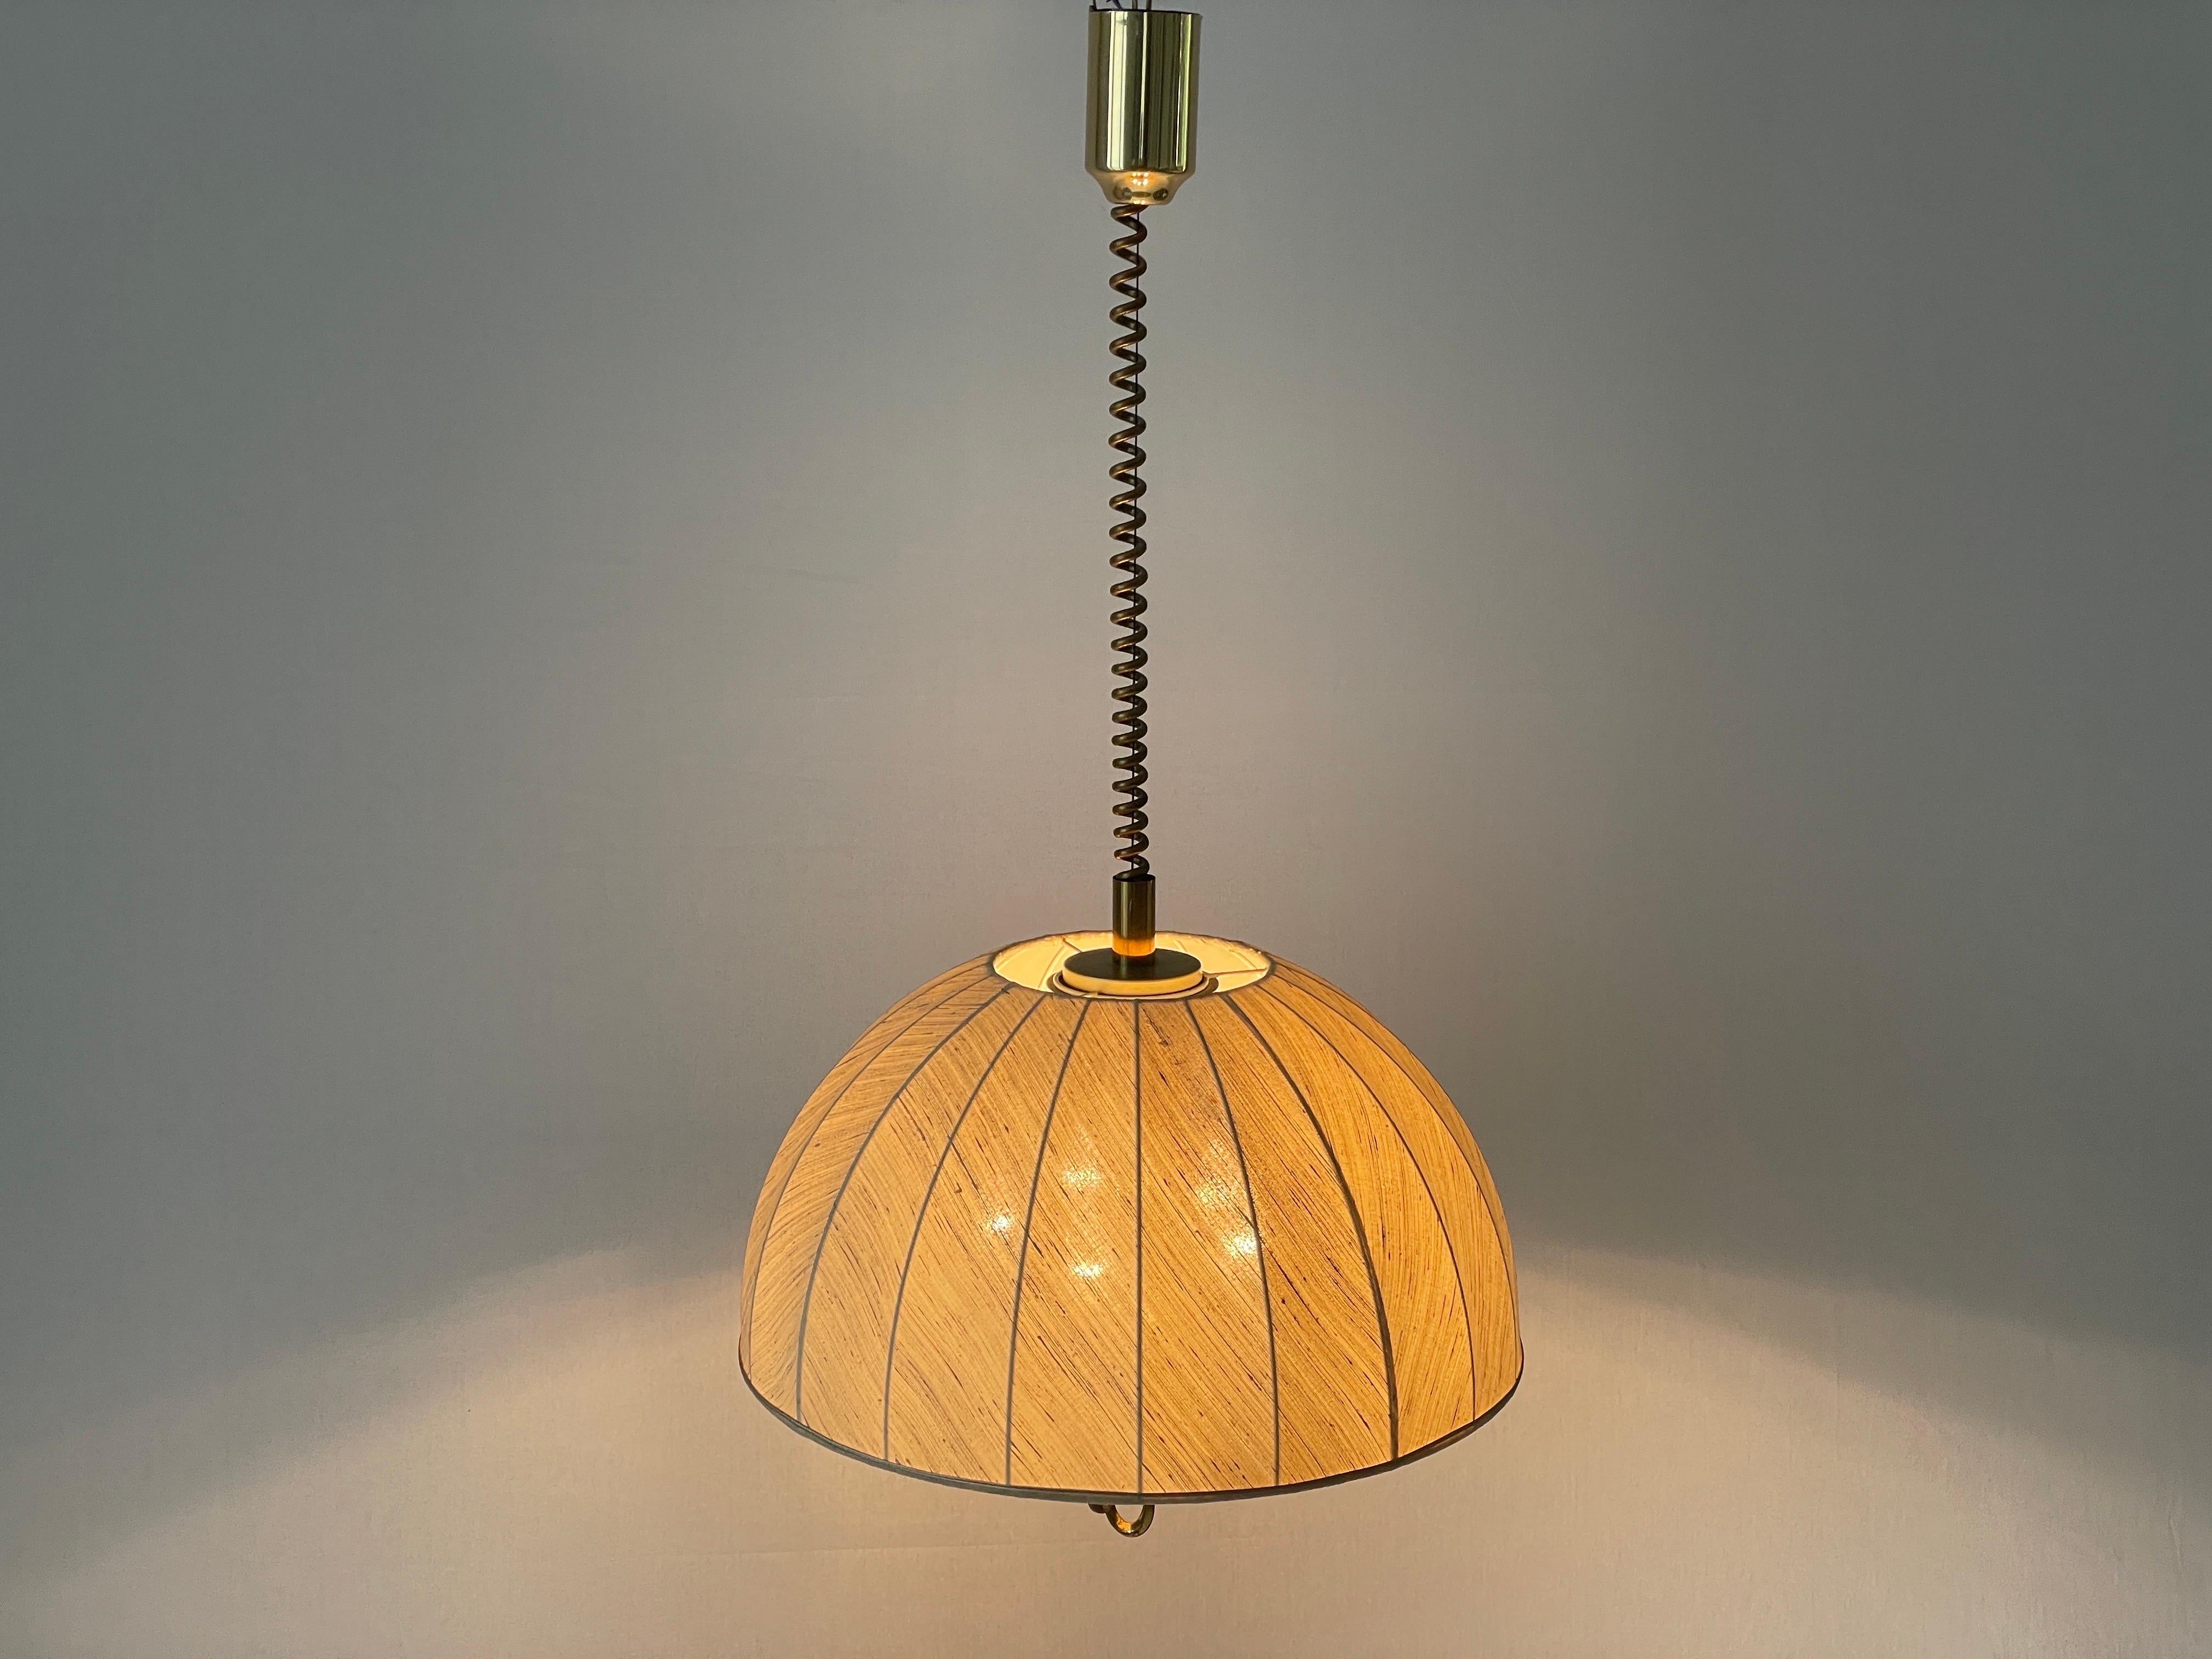 Fabric and Brass 5 socket Adjustable Shade Pendant Lamp by WKR, 1970s, Germany For Sale 7